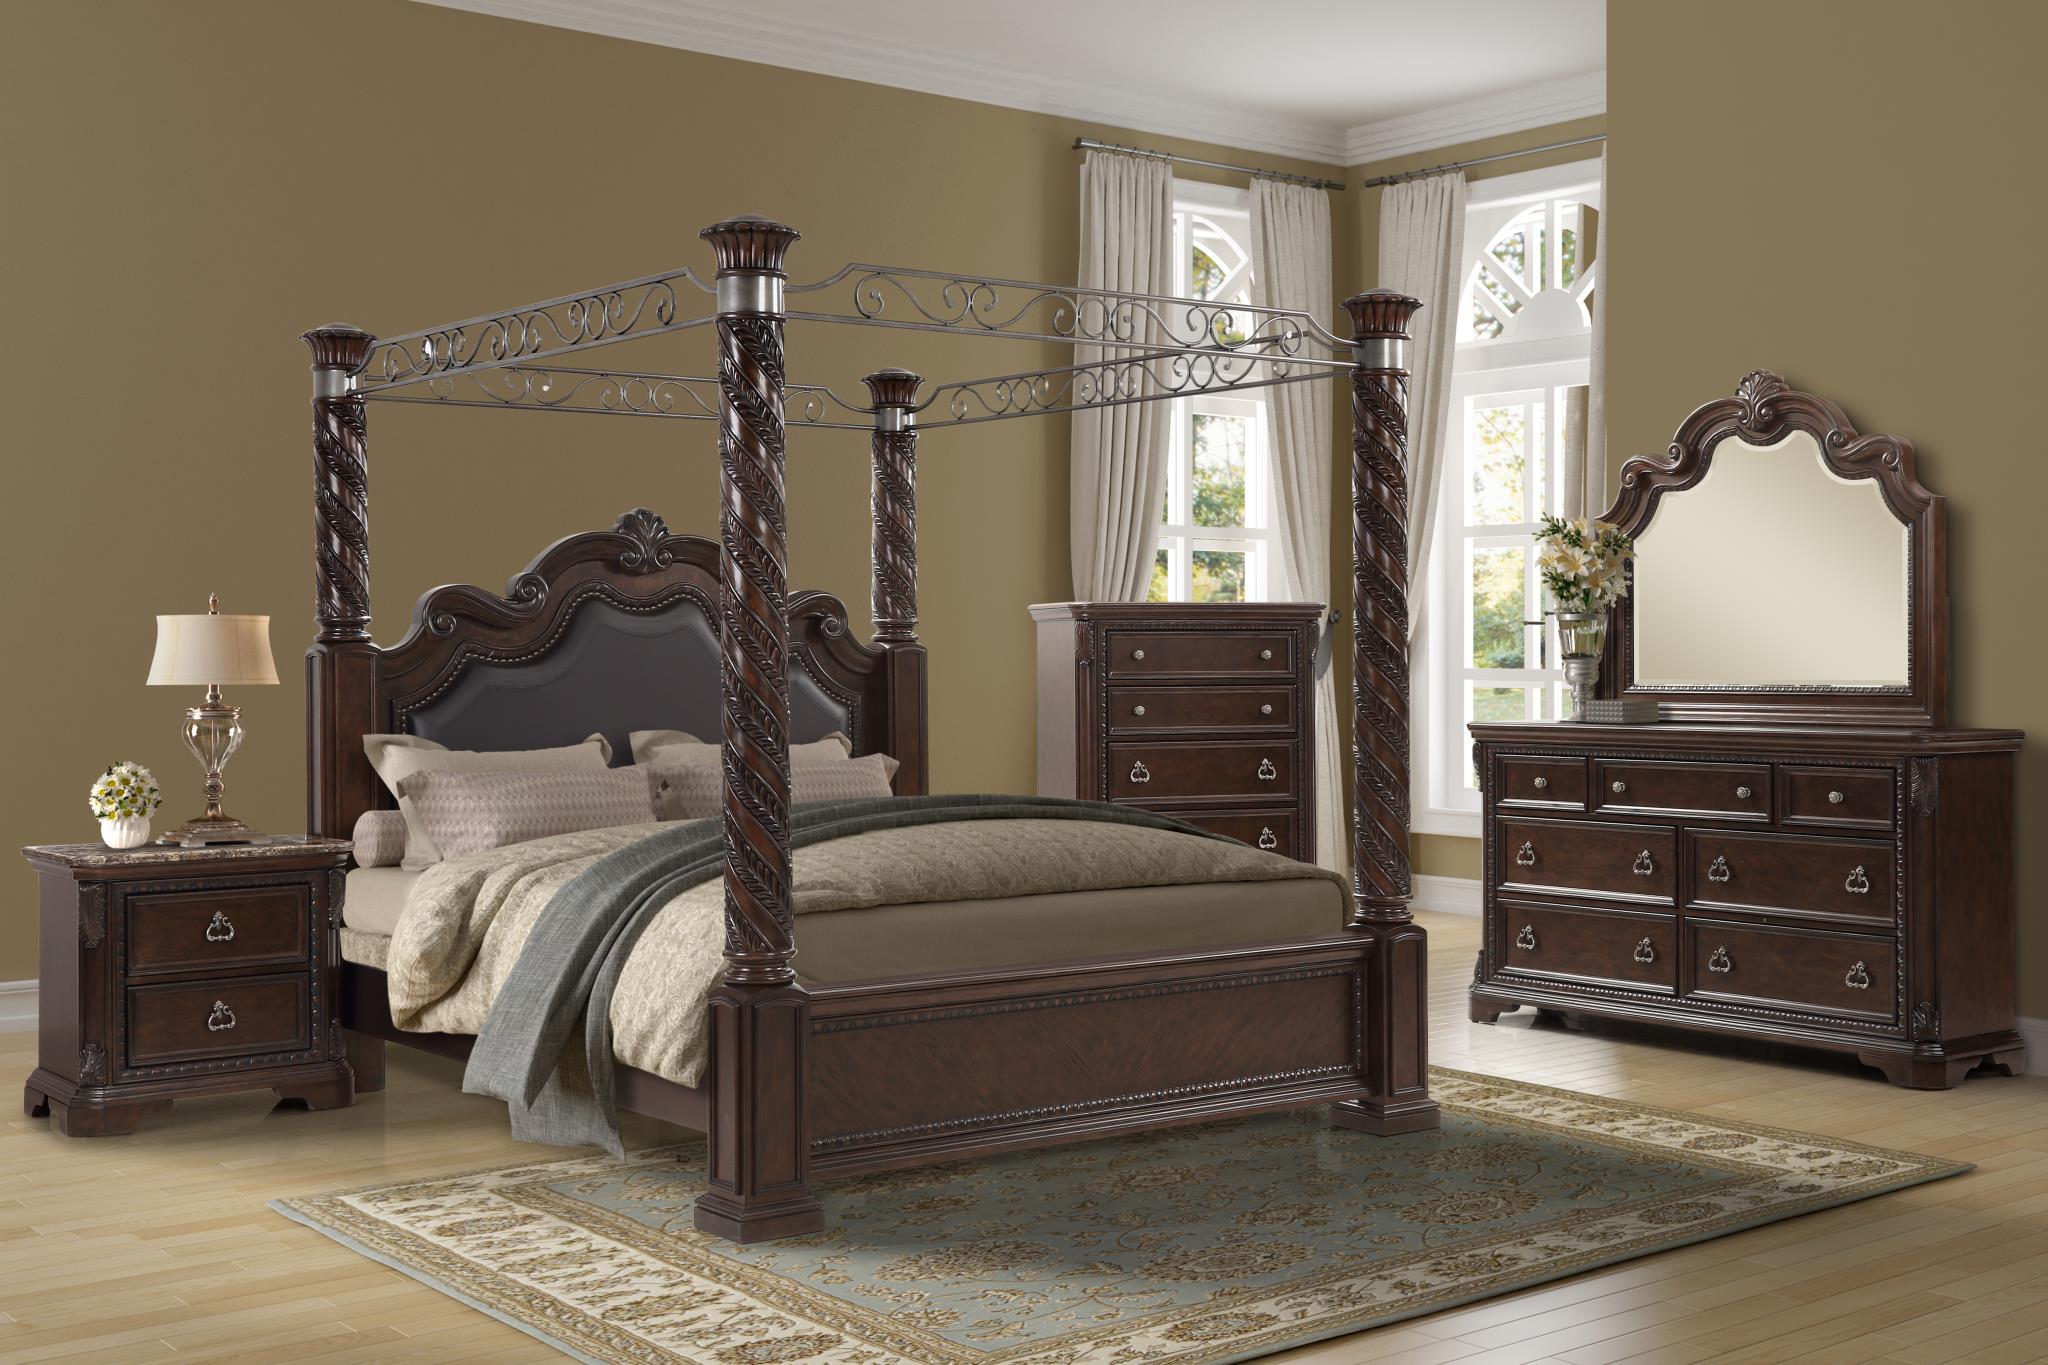 Modern, Transitional Canopy Bedroom Set COVENTRY 1988-113-Set-6 1988-113-2NDMC-6PC in Mahogany Bonded Leather